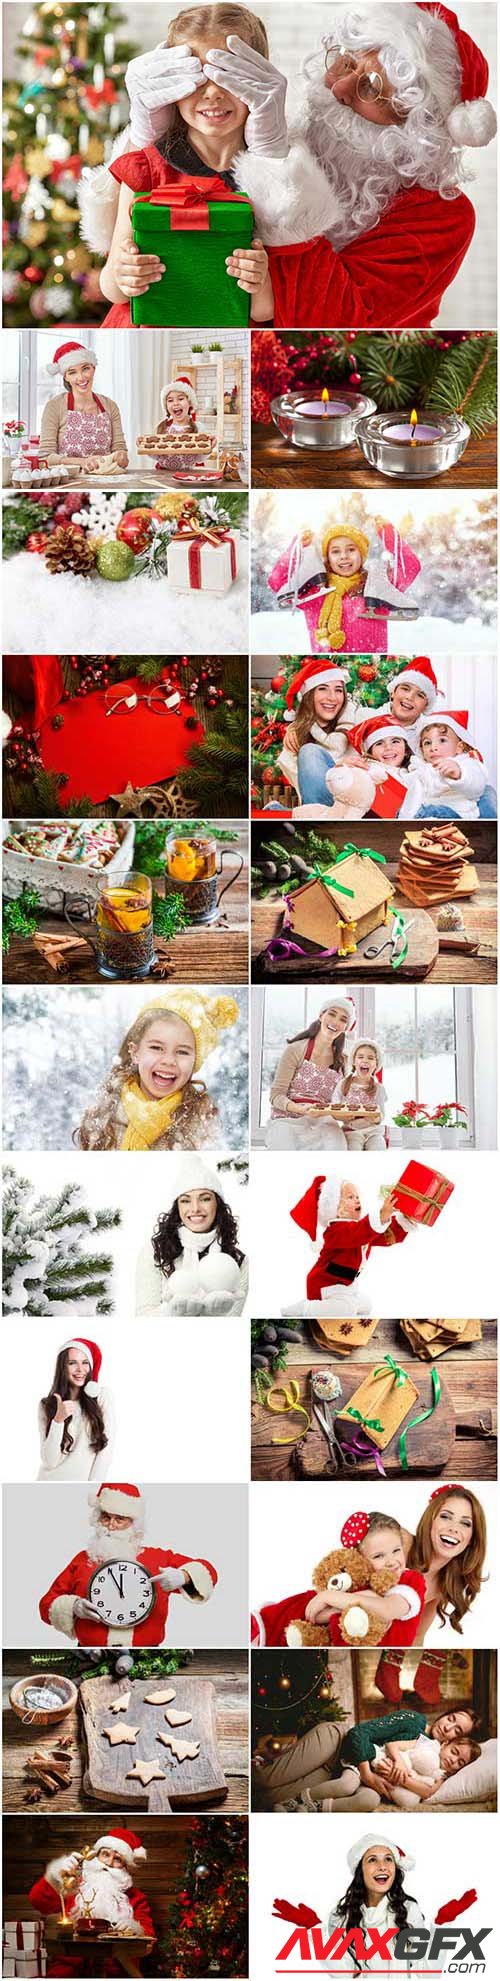 New Year and Christmas stock photos 96